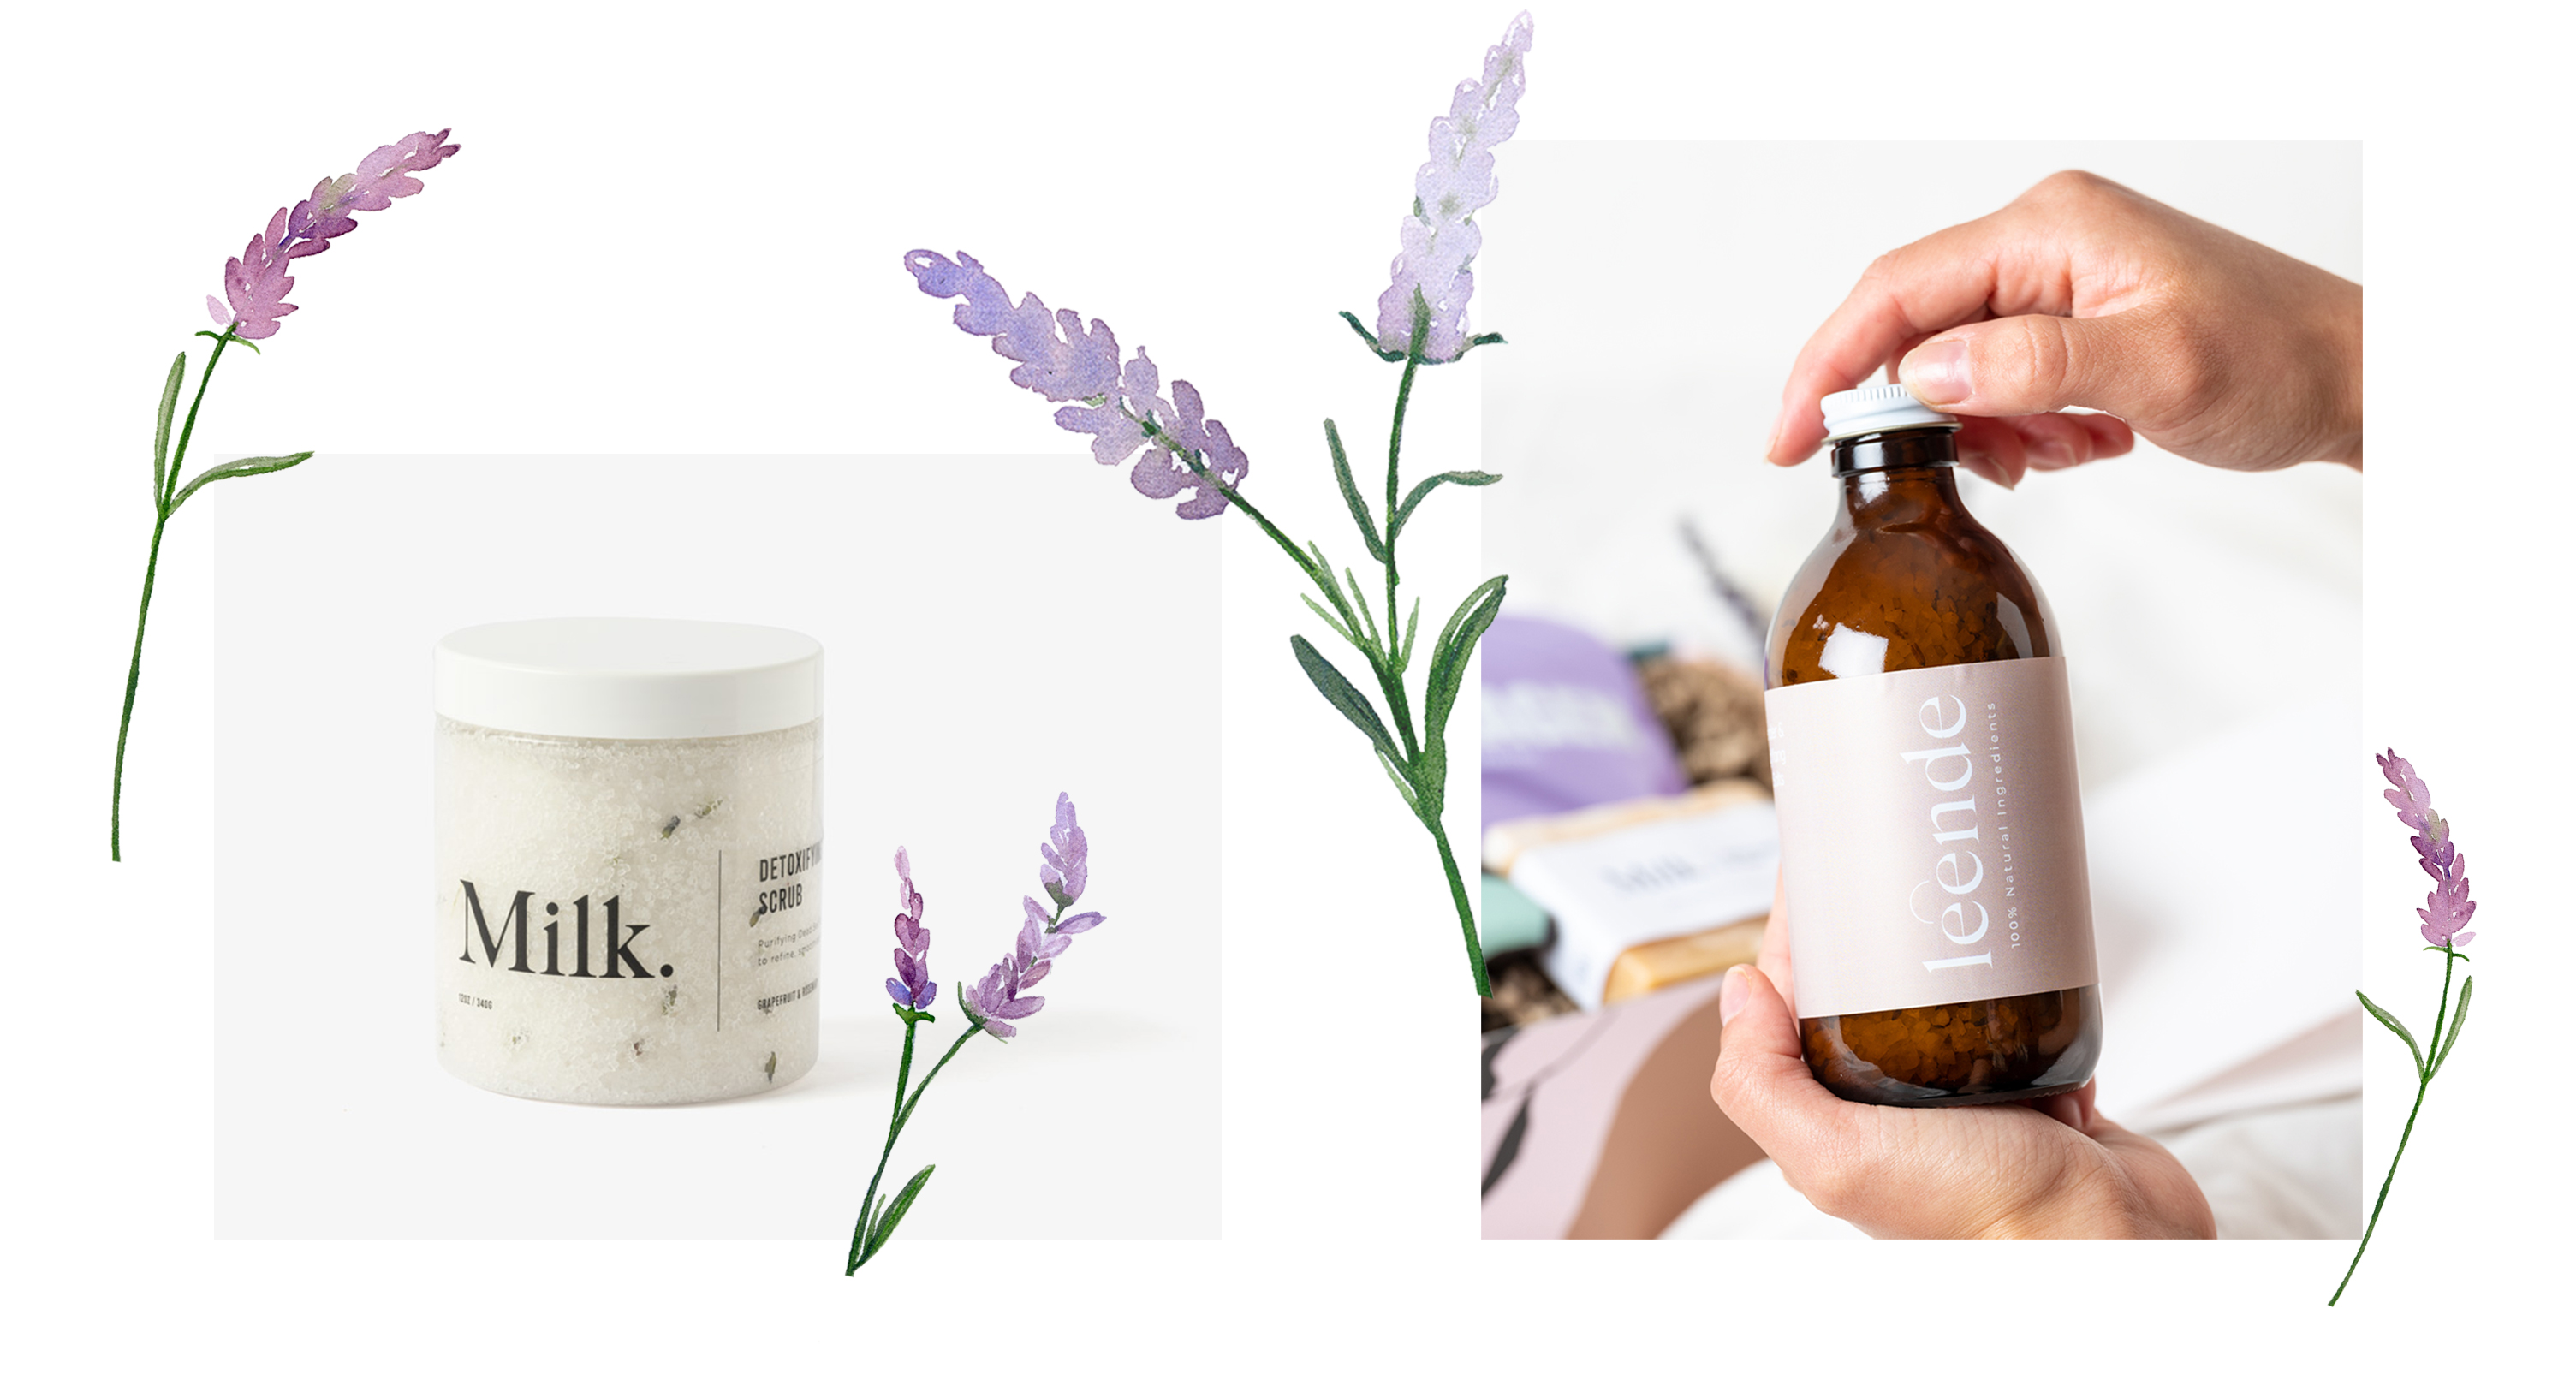 Milk Body Scrub and Ylang Ylang Bath Salts with lavender illustrations in purples